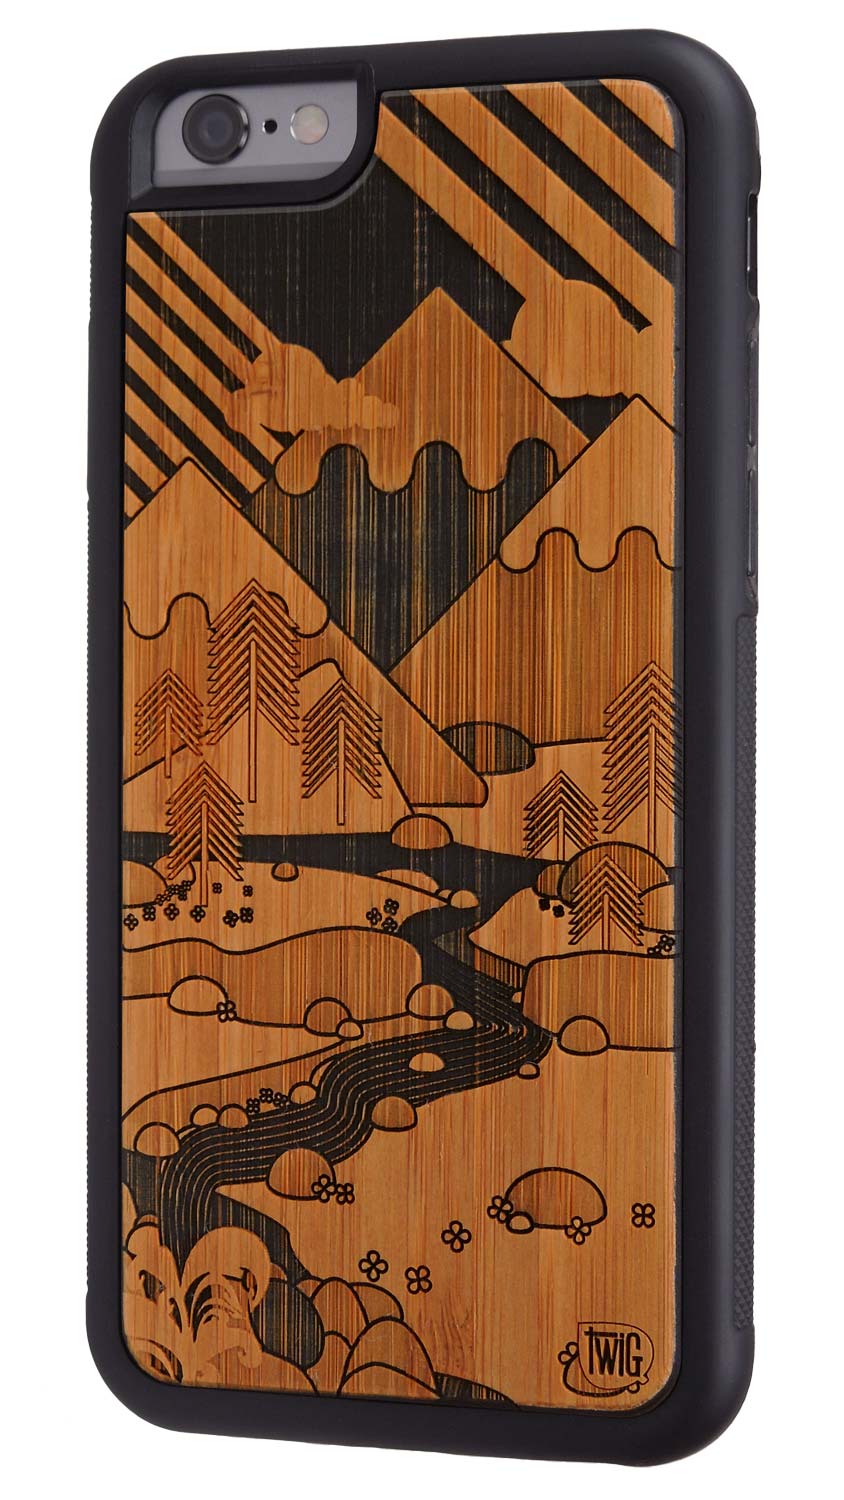 It's Only Mountains - Bamboo iPhone Case, iPhone Case - Twig Case Co.